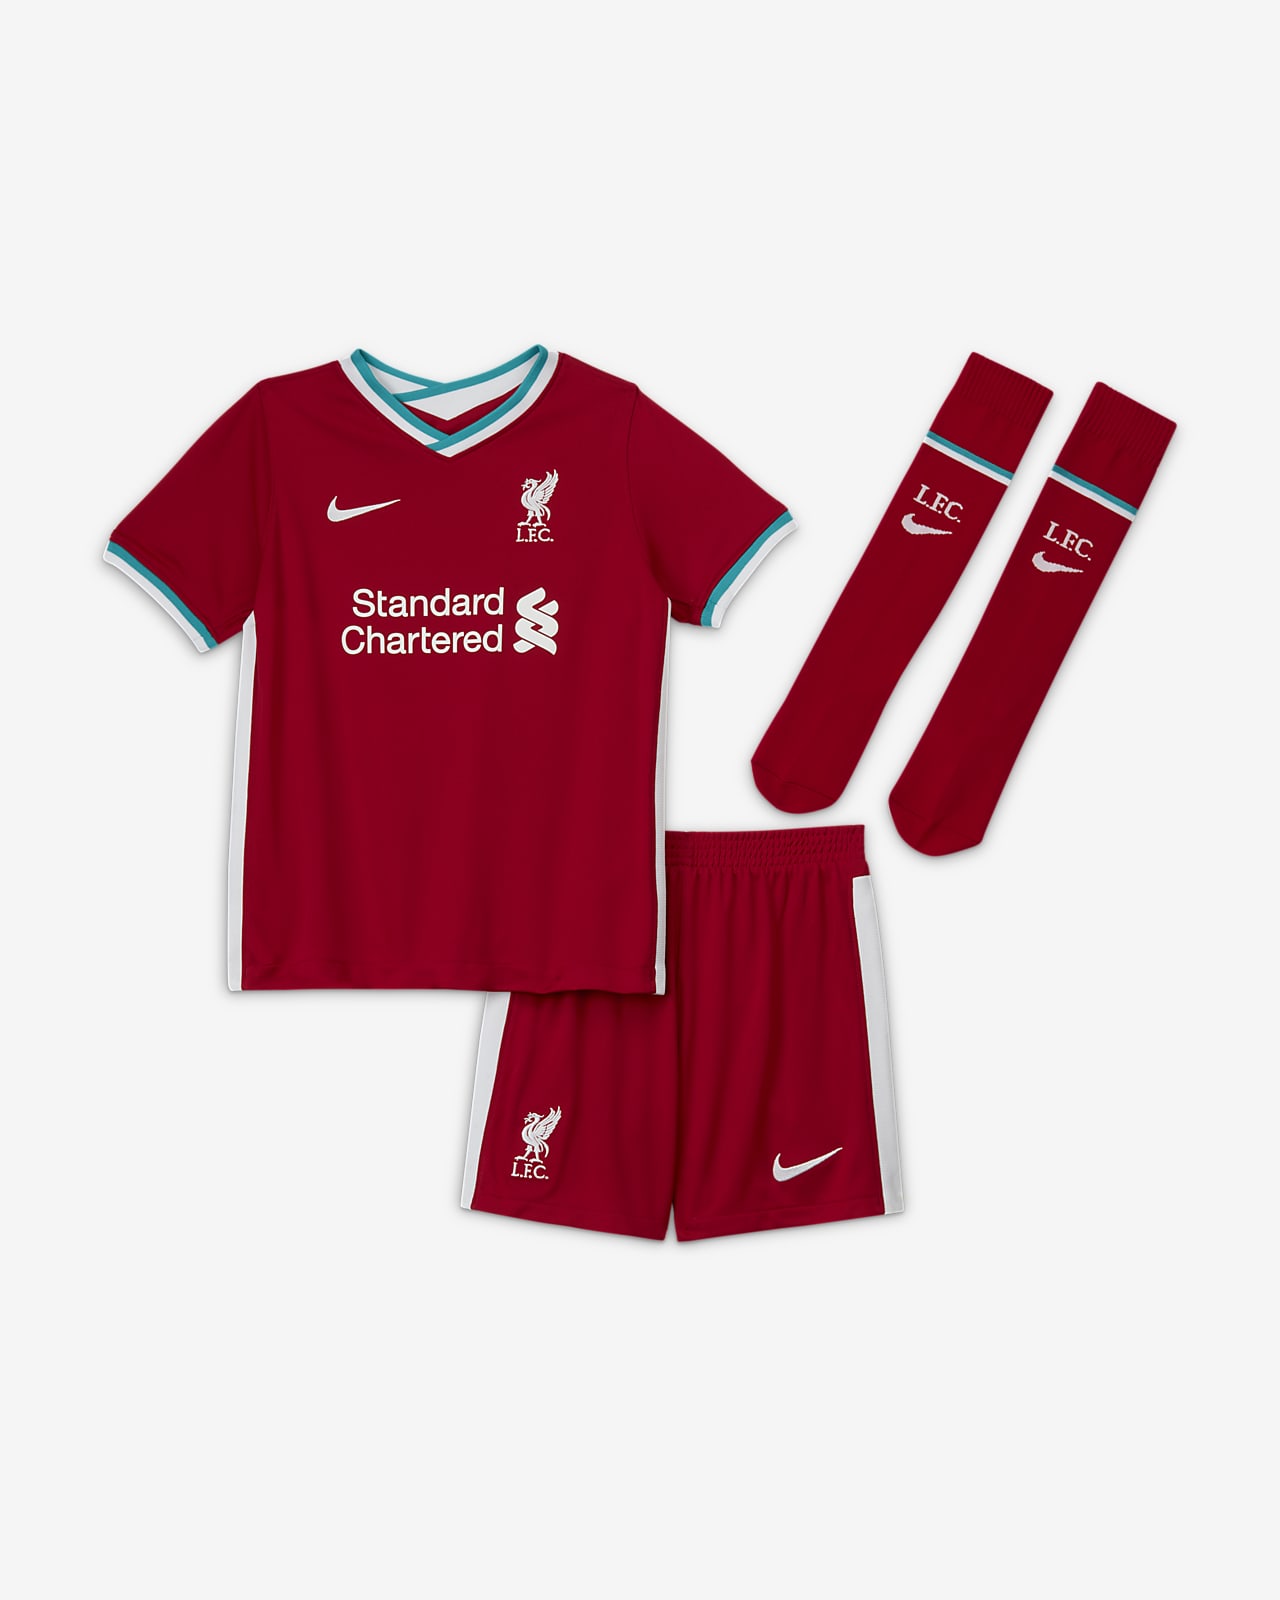 2020/21 Home Younger Kids' Football Kit 